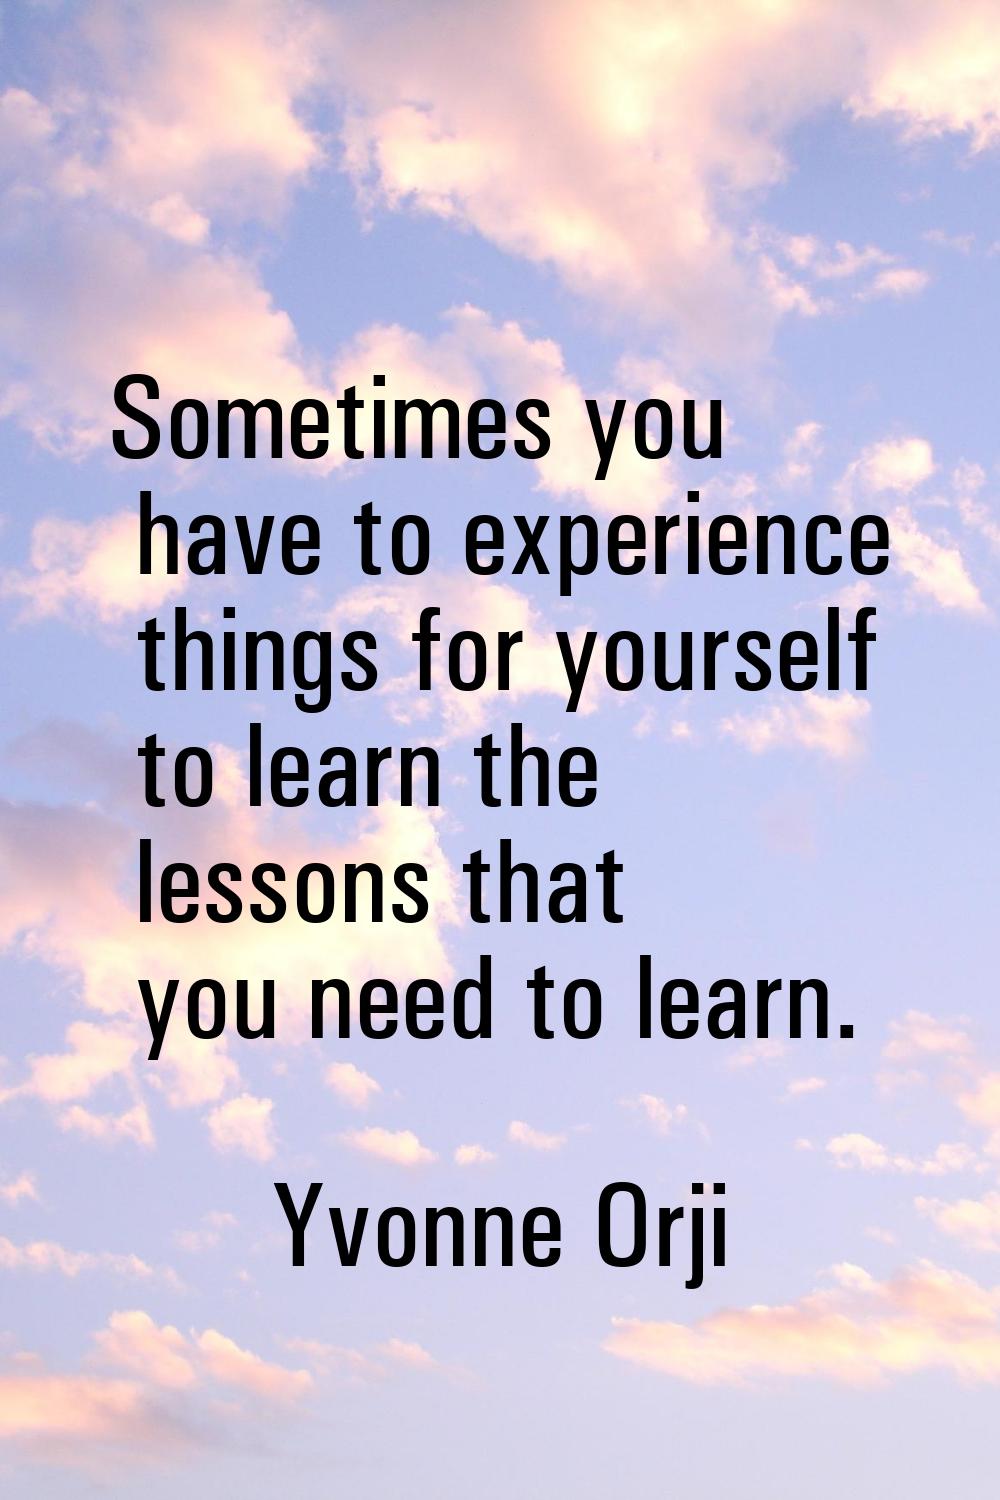 Sometimes you have to experience things for yourself to learn the lessons that you need to learn.